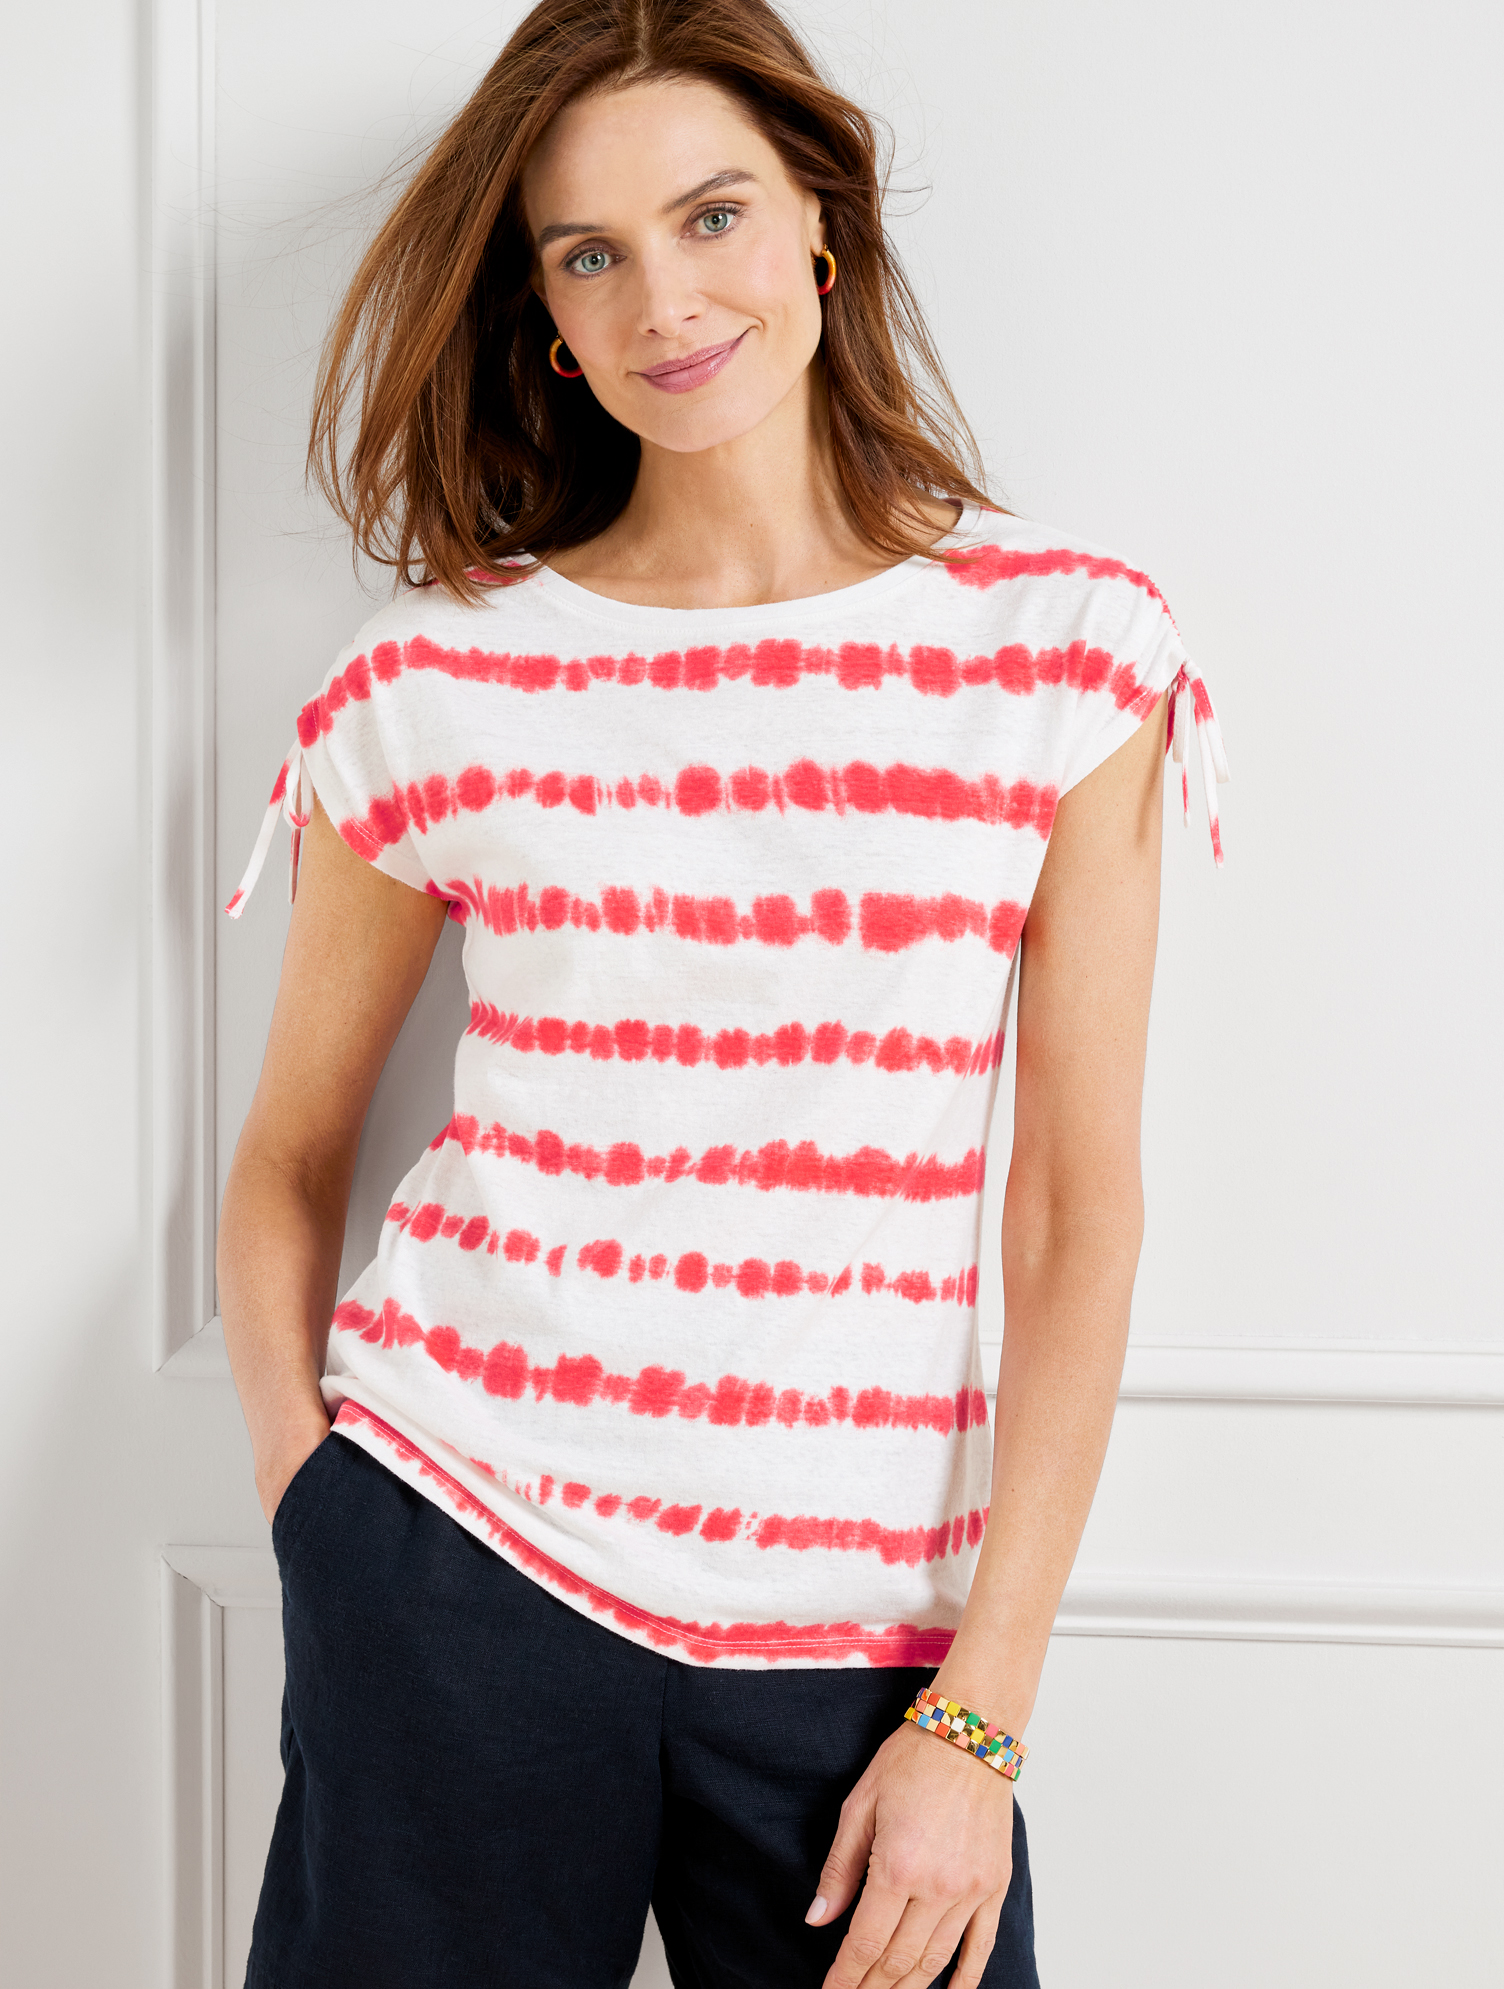 Talbots Petite - Cinched Shoulder Bateau Neck T-shirt - Tie-dye Stripe - White/red - Xl  In White,red